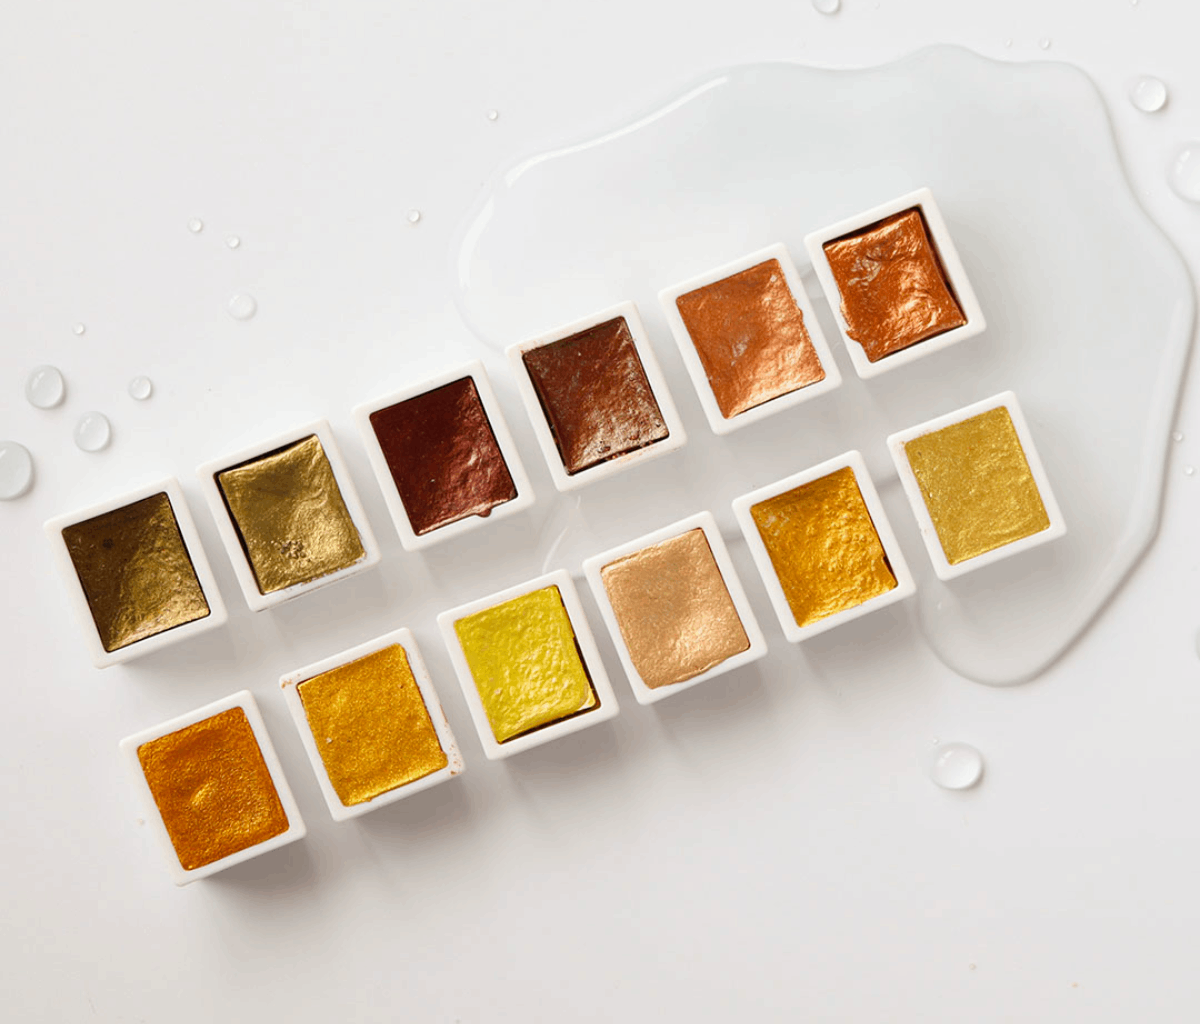 Washable Metallic Gold and Silver Watercolor Semi Paint - China